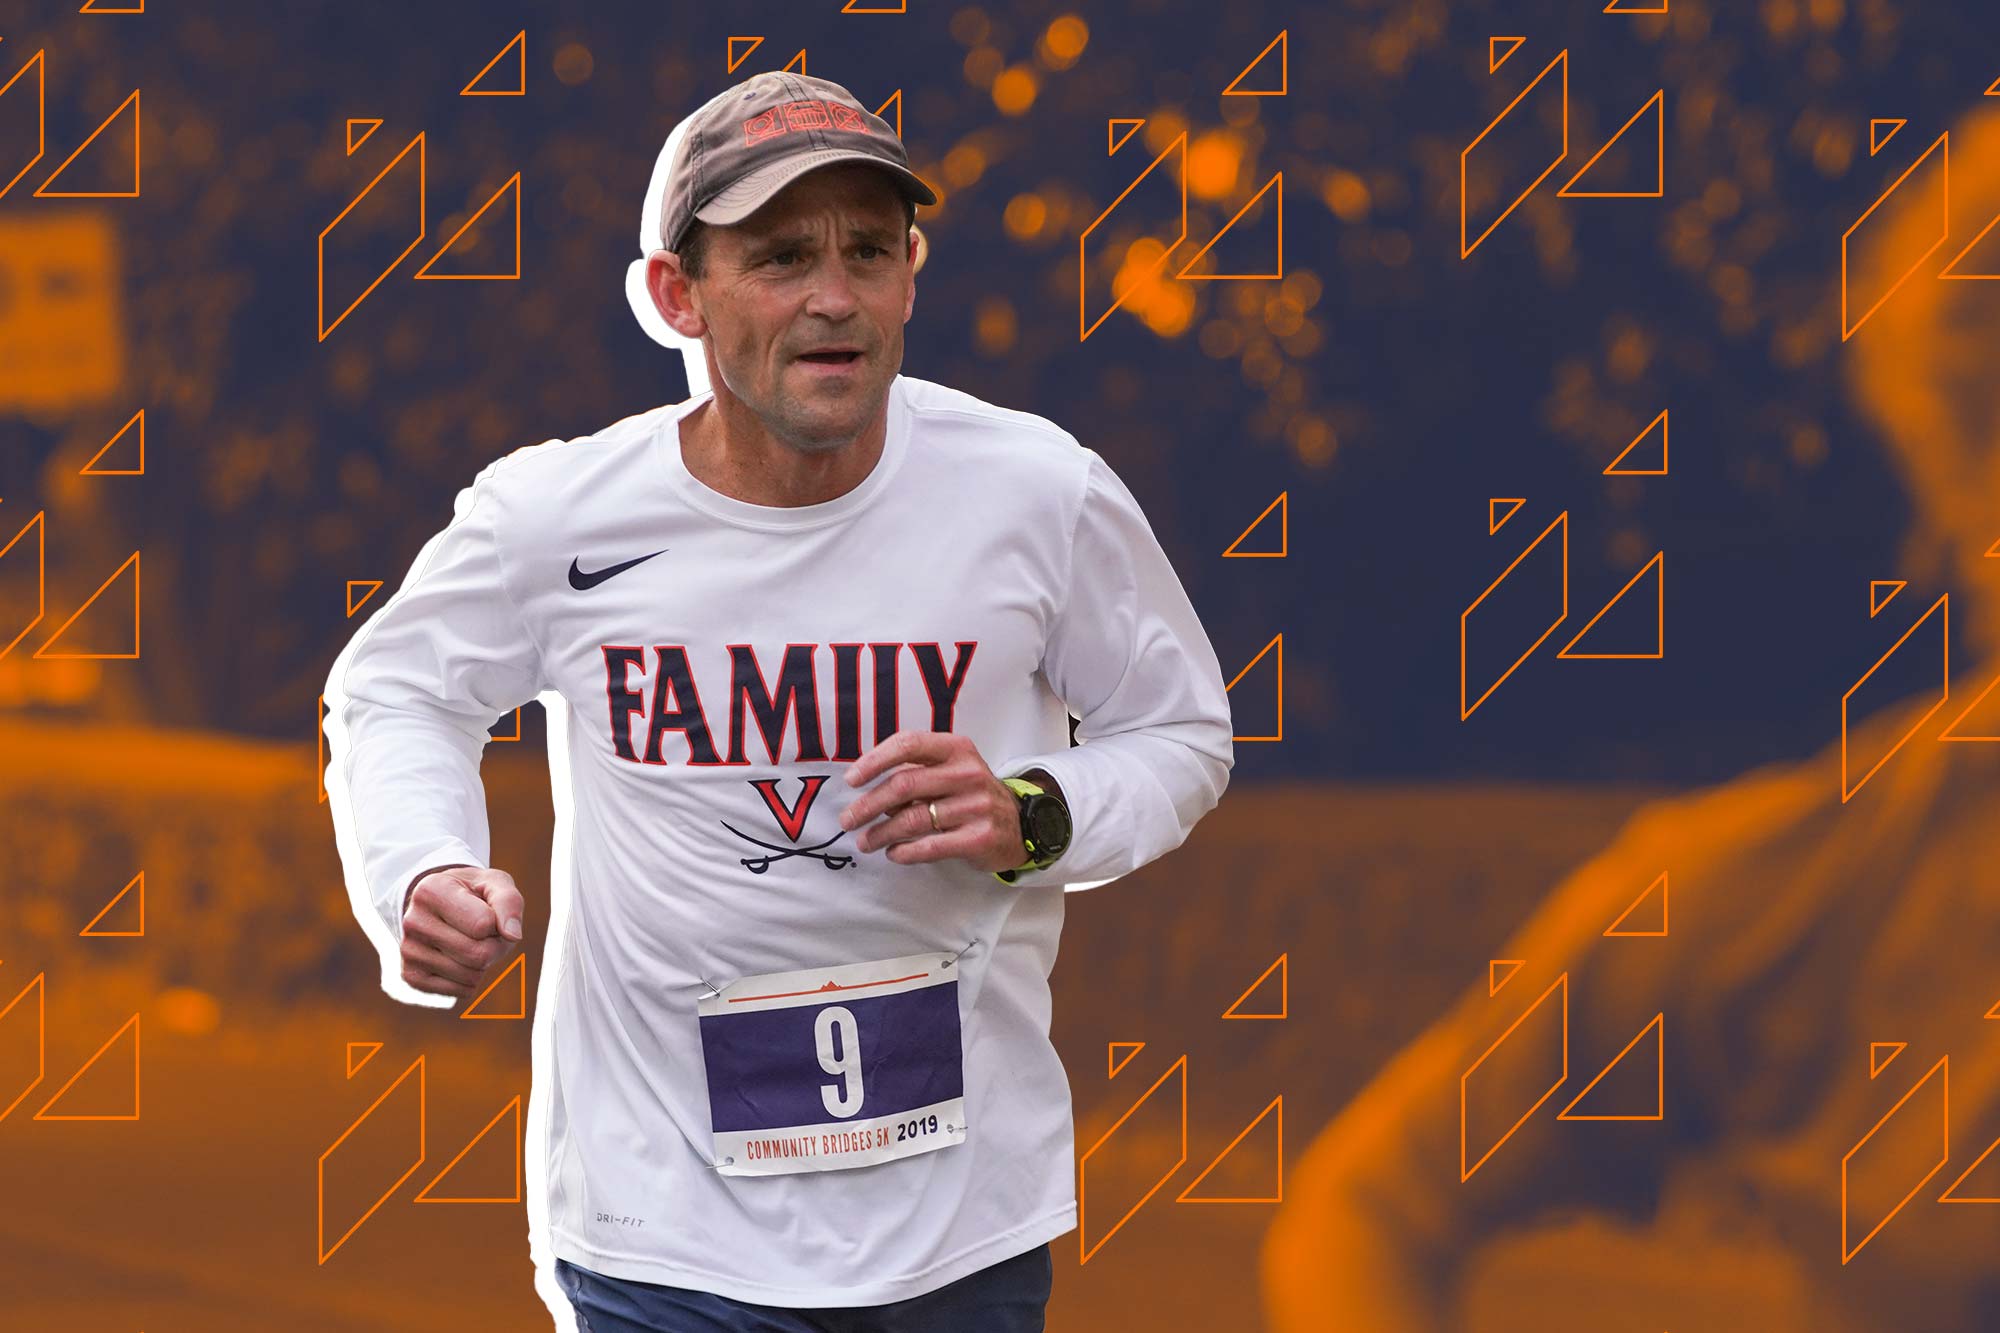 UVA President Jim Ryan running a marathon with the number 9 taped to his shirt